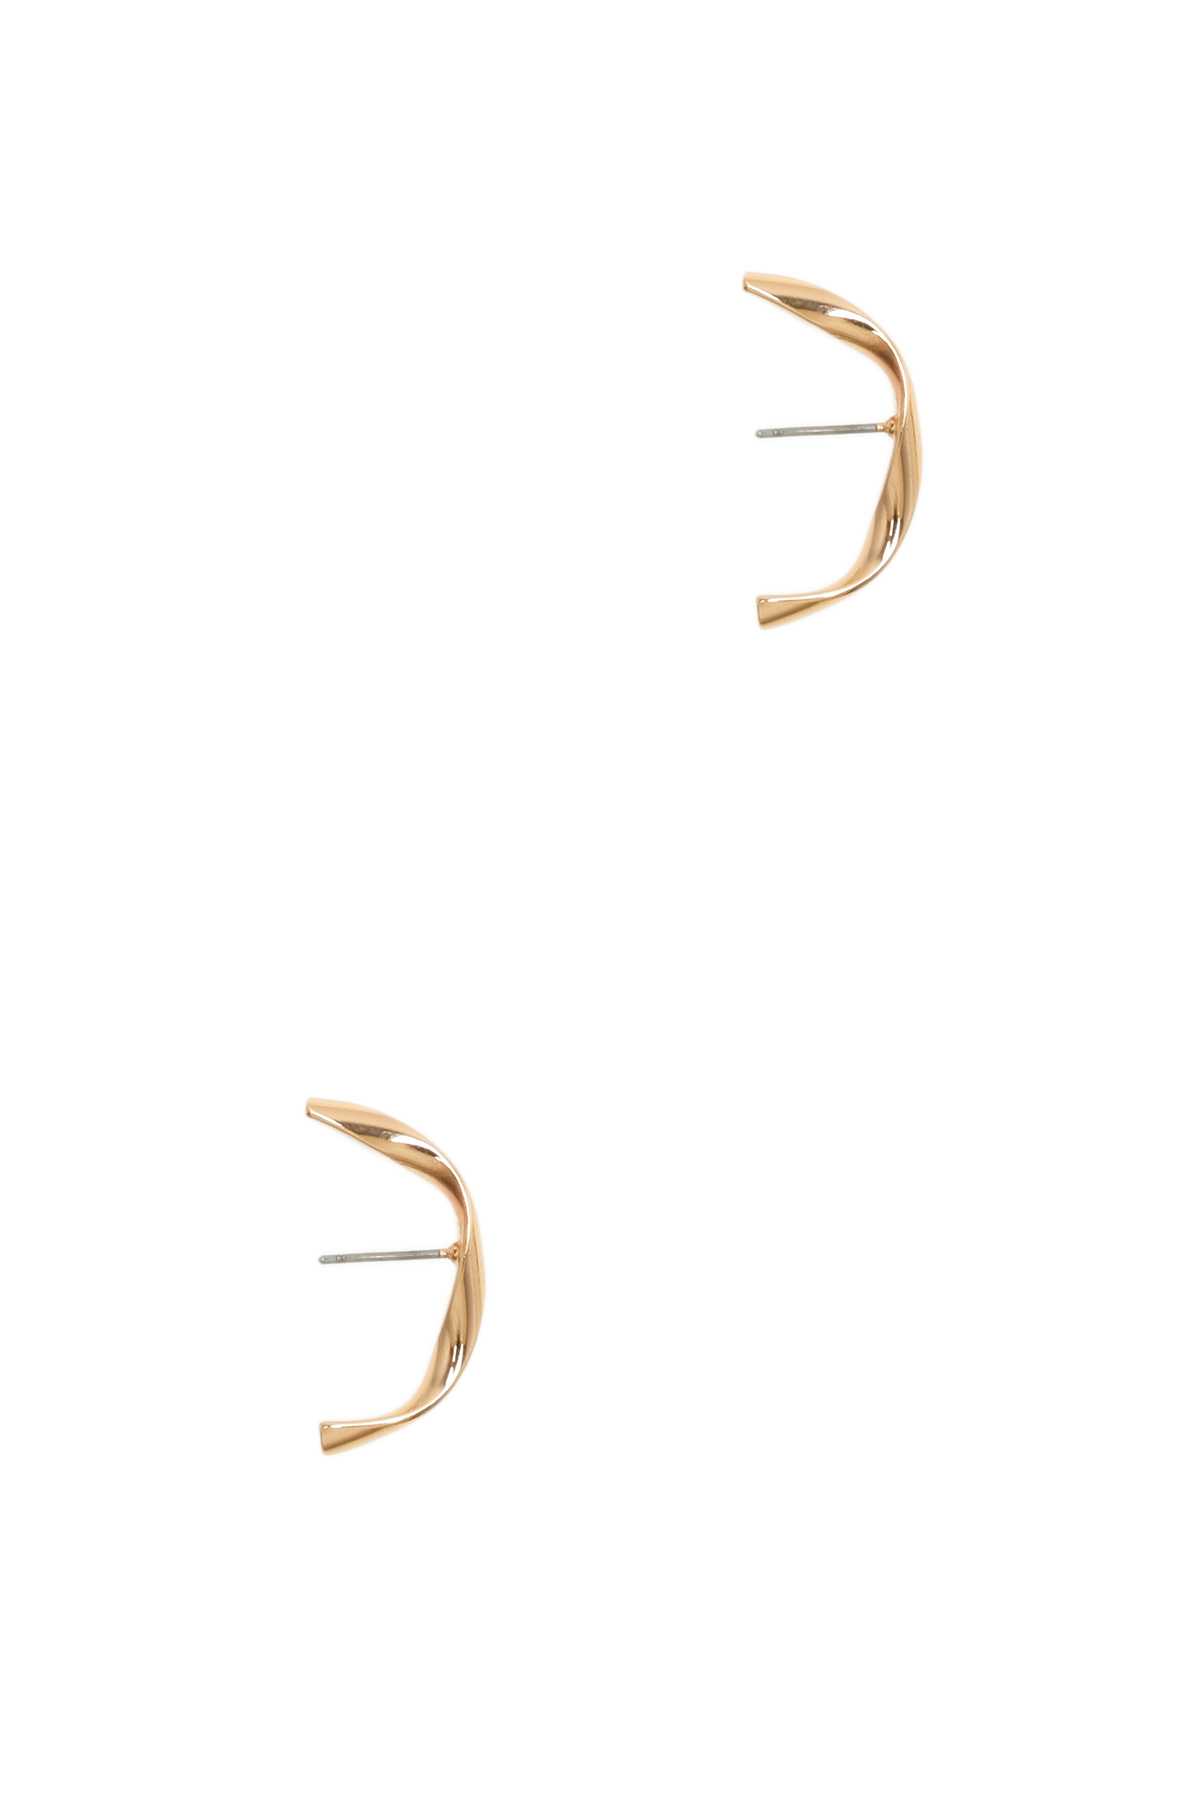 Twisted and Curvy Metal Bar Stud Earring